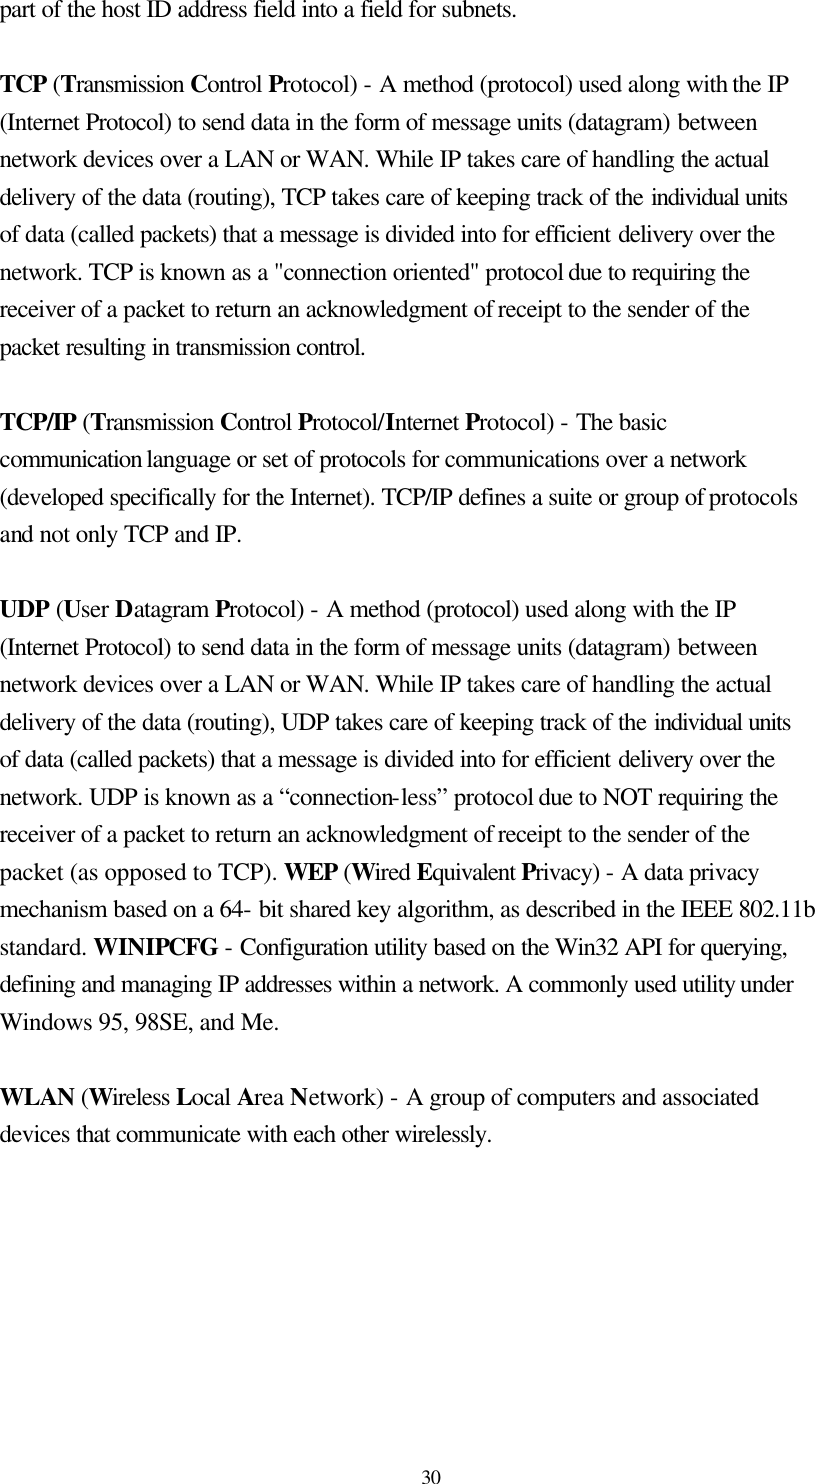  30 part of the host ID address field into a field for subnets.    TCP (Transmission Control Protocol) - A method (protocol) used along with the IP (Internet Protocol) to send data in the form of message units (datagram) between network devices over a LAN or WAN. While IP takes care of handling the actual delivery of the data (routing), TCP takes care of keeping track of the individual units of data (called packets) that a message is divided into for efficient delivery over the network. TCP is known as a &quot;connection oriented&quot; protocol due to requiring the receiver of a packet to return an acknowledgment of receipt to the sender of the packet resulting in transmission control.  TCP/IP (Transmission Control Protocol/Internet Protocol) - The basic communication language or set of protocols for communications over a network (developed specifically for the Internet). TCP/IP defines a suite or group of protocols and not only TCP and IP.  UDP (User Datagram Protocol) - A method (protocol) used along with the IP (Internet Protocol) to send data in the form of message units (datagram) between network devices over a LAN or WAN. While IP takes care of handling the actual delivery of the data (routing), UDP takes care of keeping track of the individual units of data (called packets) that a message is divided into for efficient delivery over the network. UDP is known as a “connection-less” protocol due to NOT requiring the receiver of a packet to return an acknowledgment of receipt to the sender of the packet (as opposed to TCP). WEP (Wired Equivalent Privacy) - A data privacy mechanism based on a 64- bit shared key algorithm, as described in the IEEE 802.11b standard. WINIPCFG - Configuration utility based on the Win32 API for querying, defining and managing IP addresses within a network. A commonly used utility under Windows 95, 98SE, and Me.  WLAN (Wireless Local Area Network) - A group of computers and associated devices that communicate with each other wirelessly.  